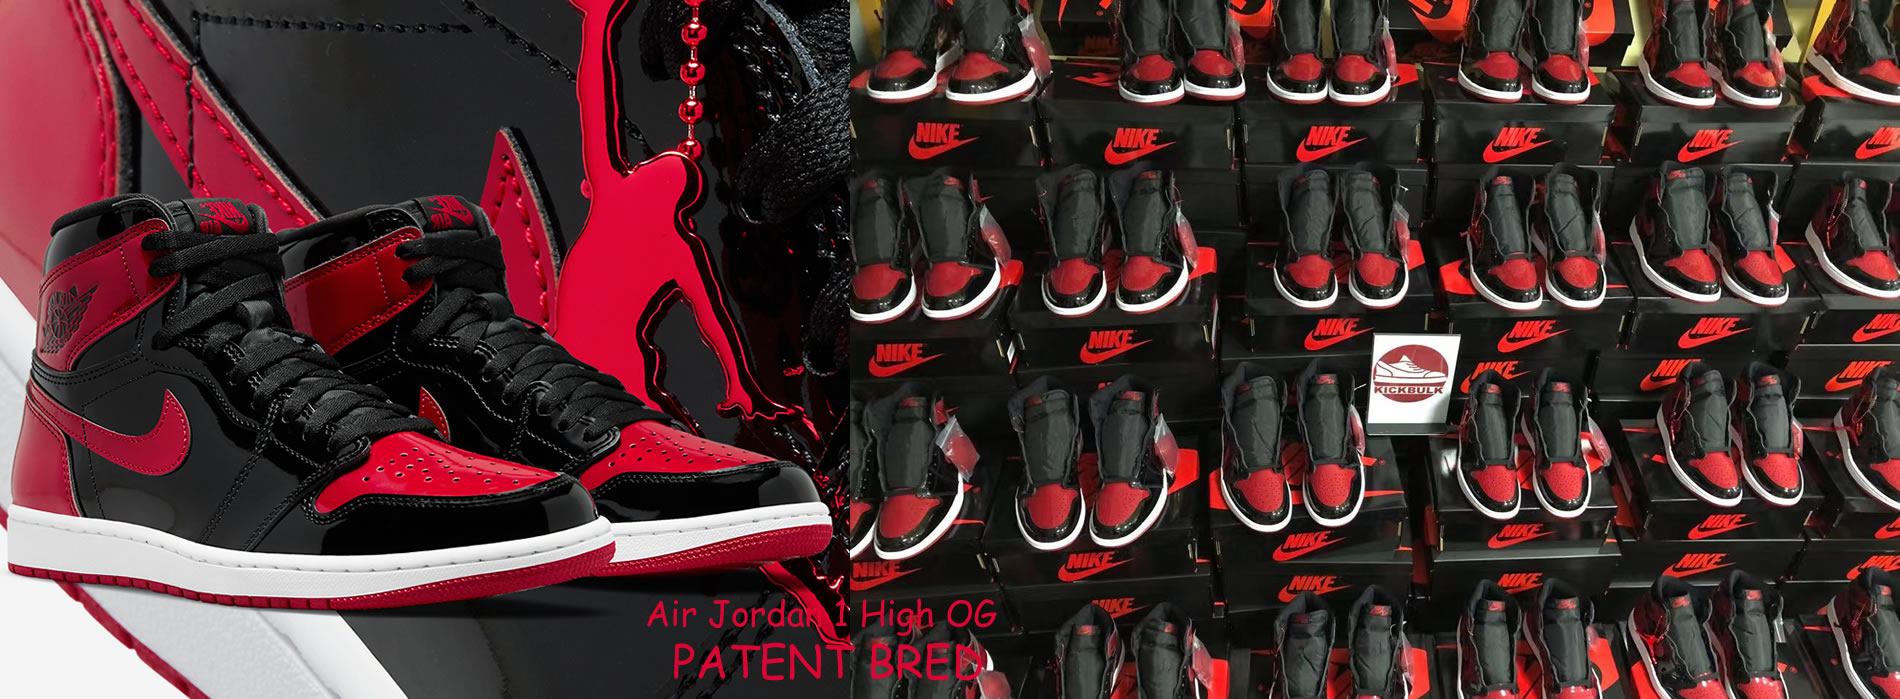 Sneakers In Powder Synthetic Fibers RETRO HIGH OG PATENT 'BRED' 555088-063